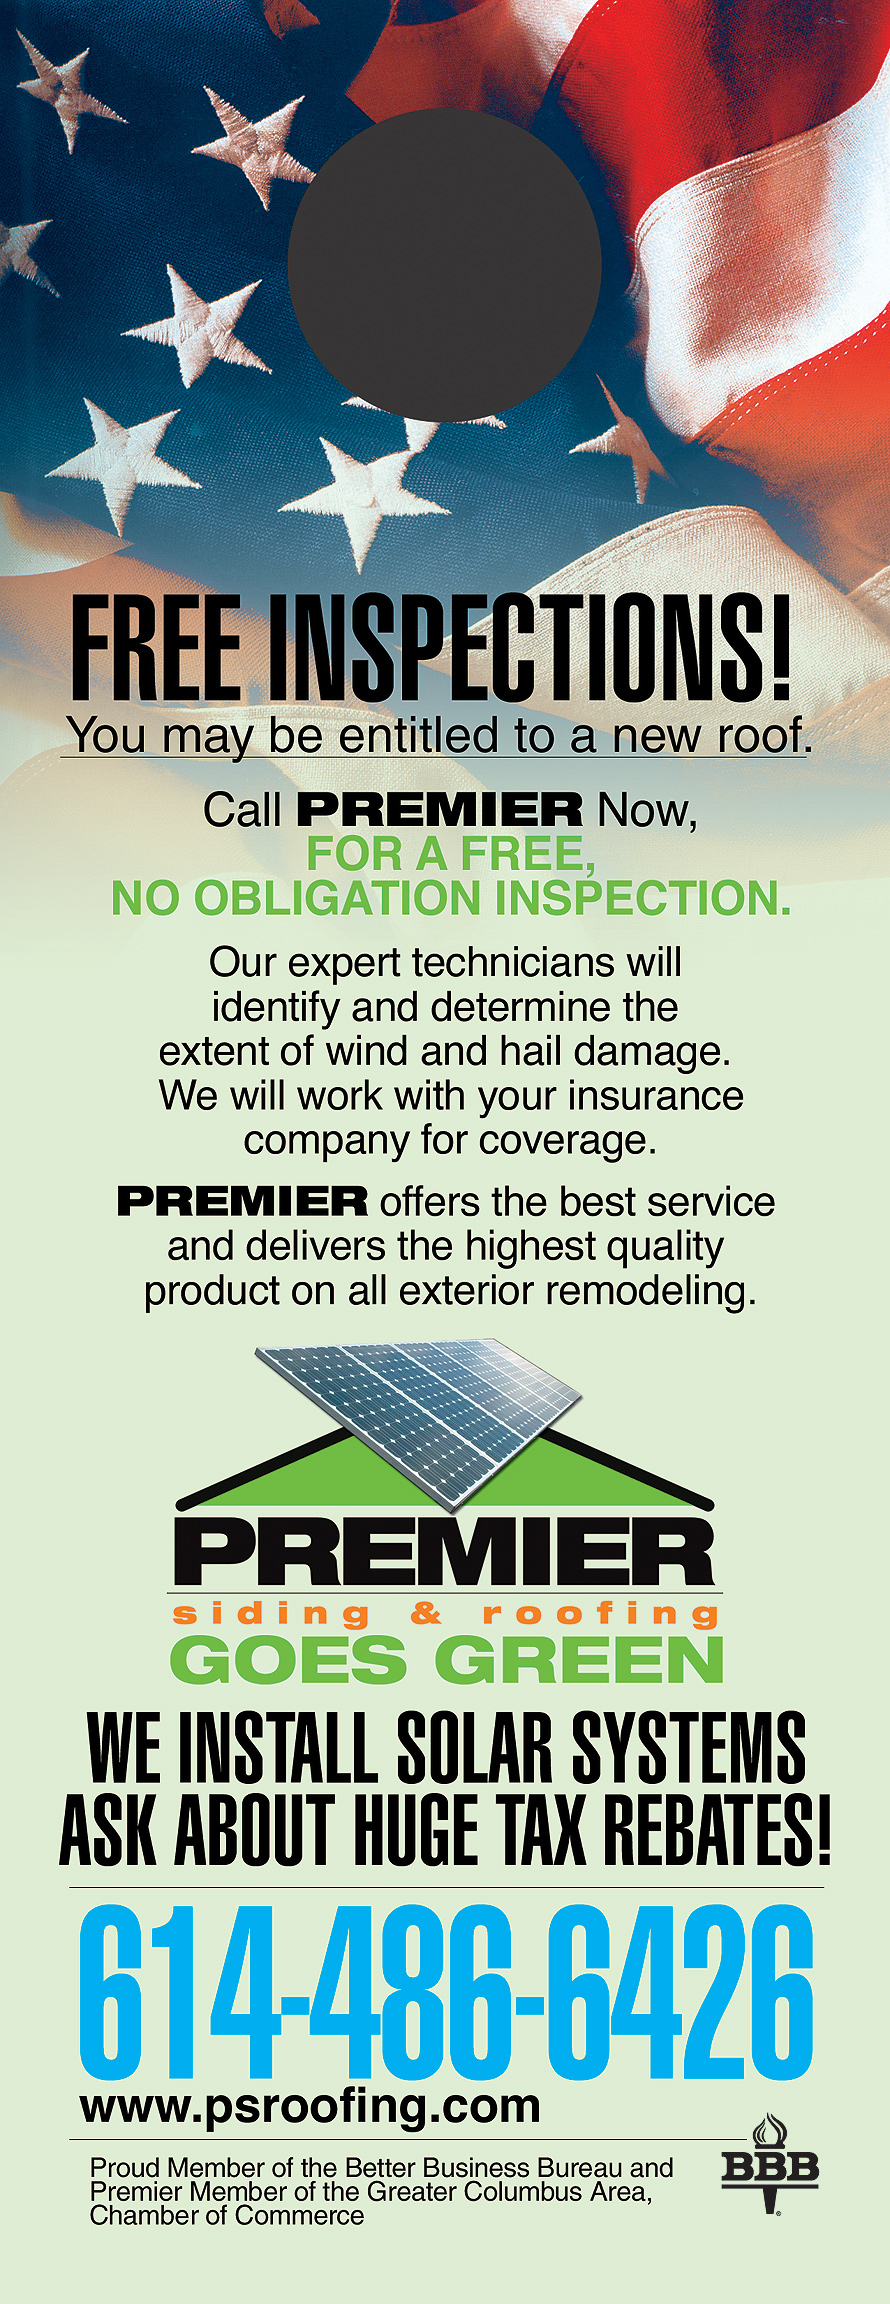 Premier Siding and Roofing